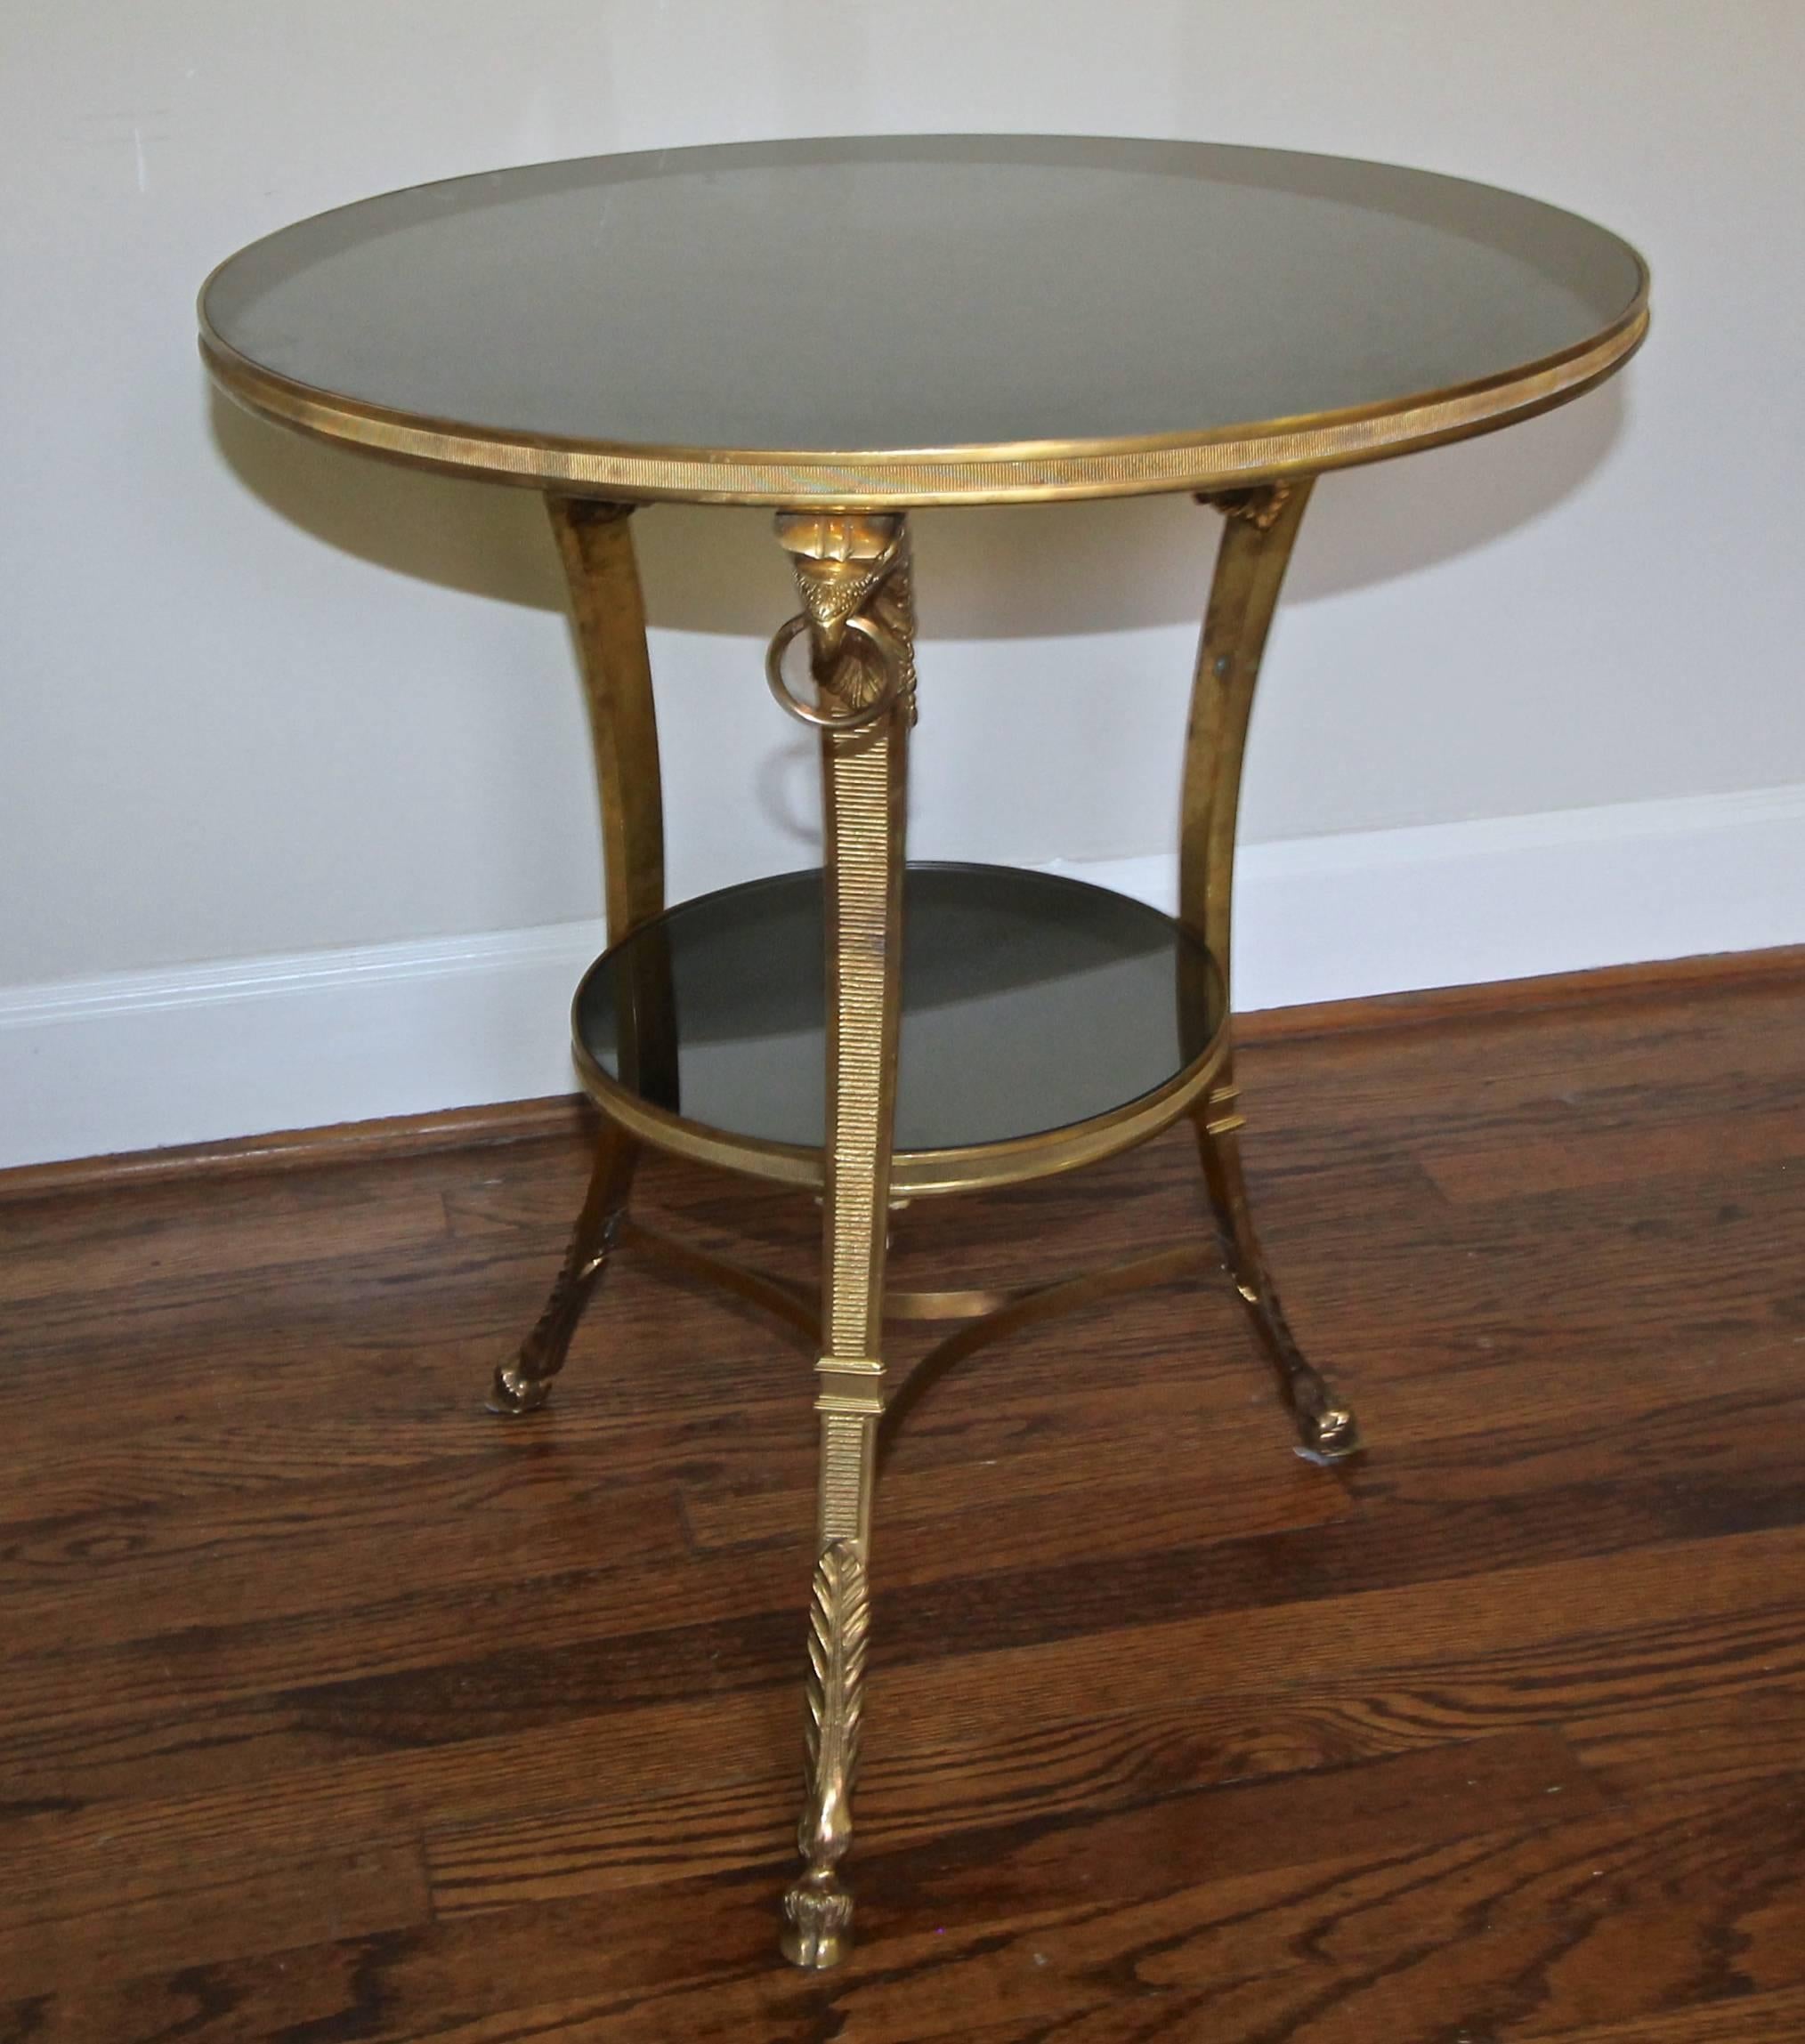 French neoclassic gilt bronze and dark mirrored glass tops gueridon side or end table, expertly crafted and detailed with eagle head and hoof feet motif.